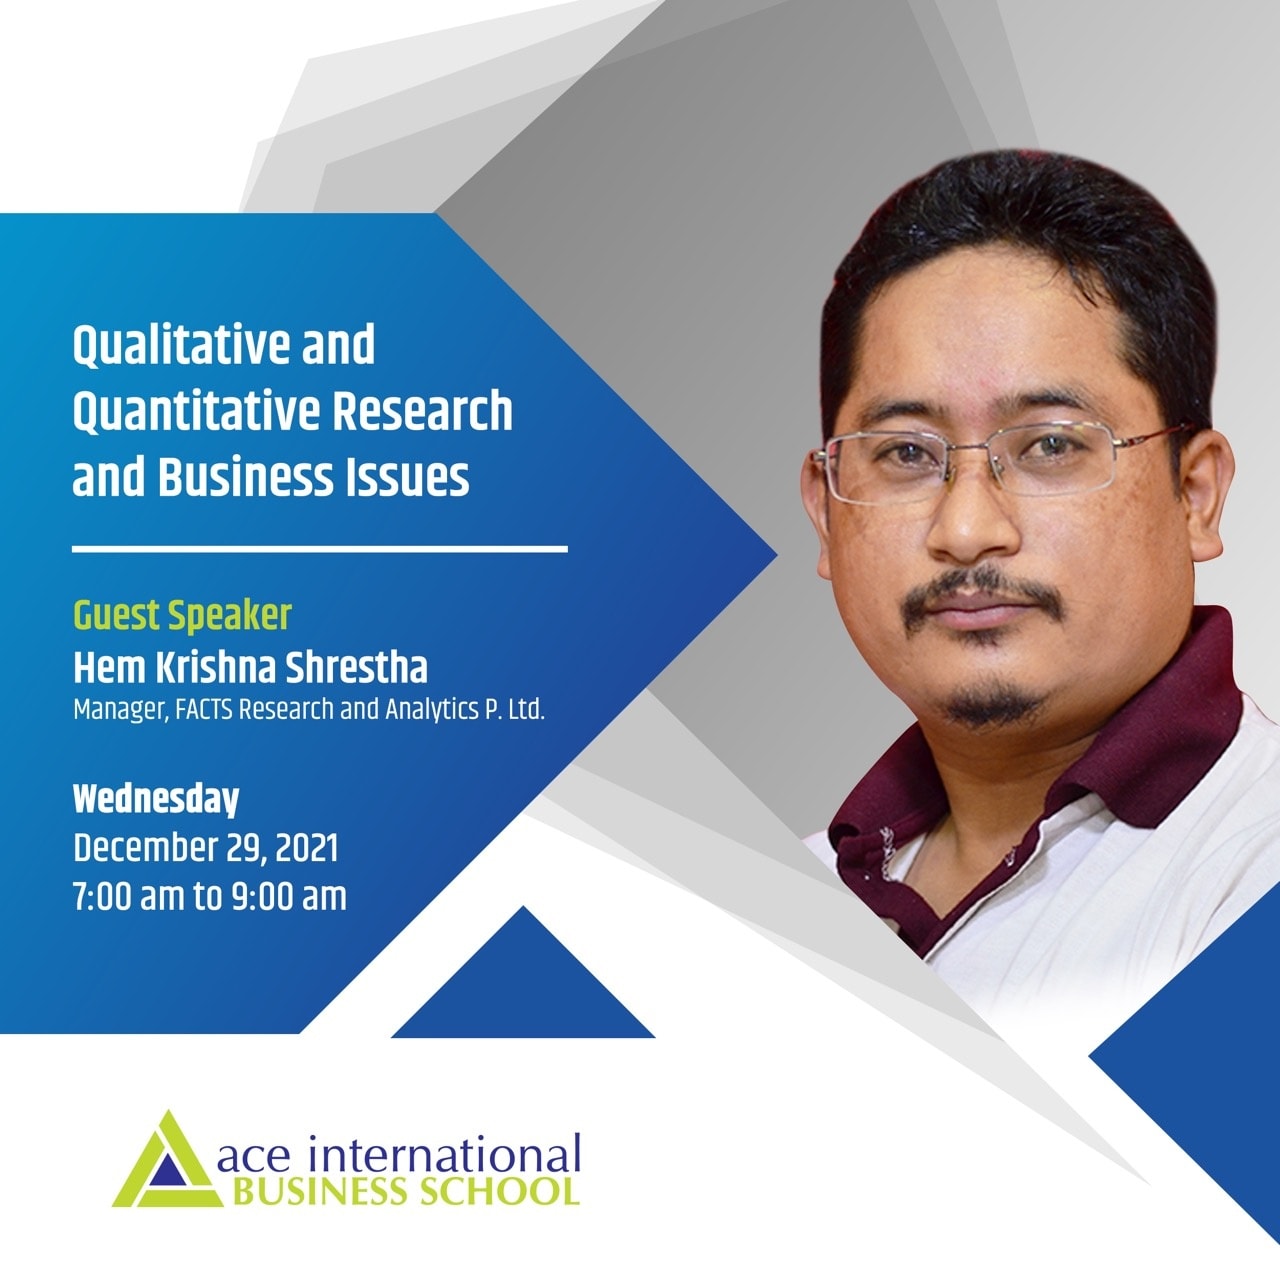 Guest Session on “Qualitative and Quantitative Research and Business Issues